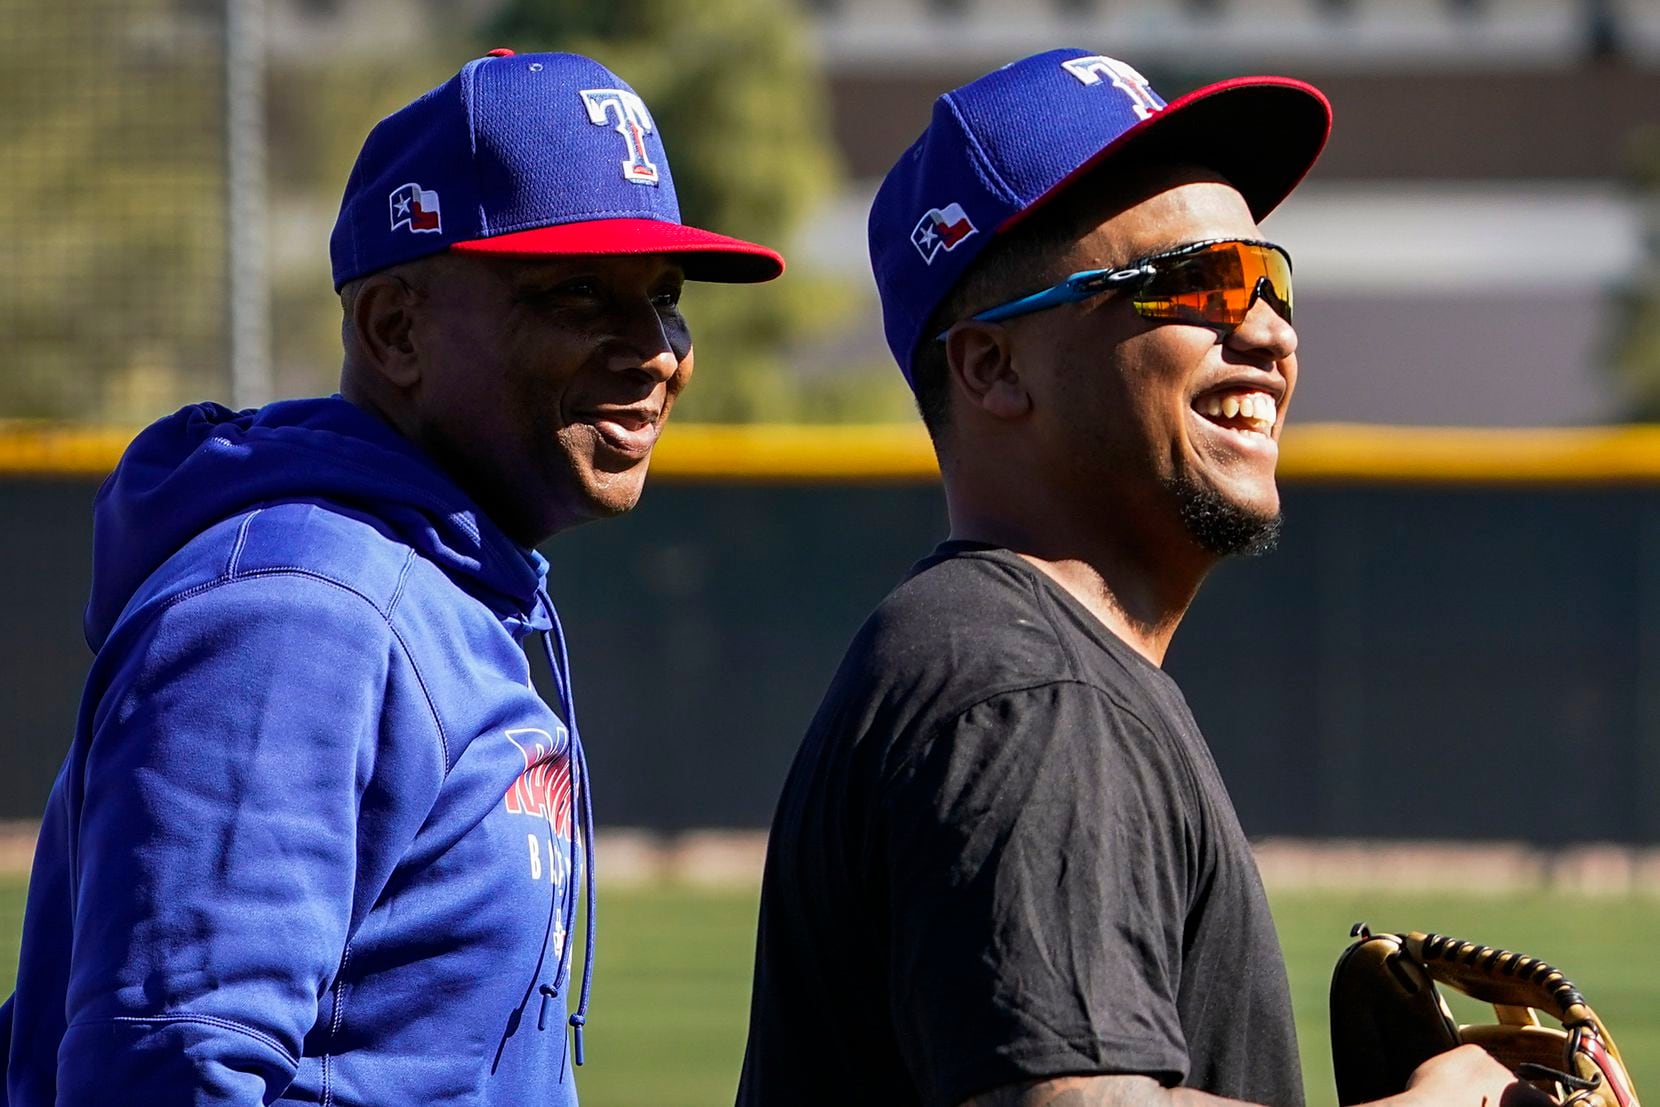 Texas Rangers outfielder Willie Calhoun (right) laughs with third base coach Tony Beasley during the first spring training workout for pitchers and catchers at the team's training facility on Wednesday, Feb. 12, 2020, in Surprise, Ariz. 